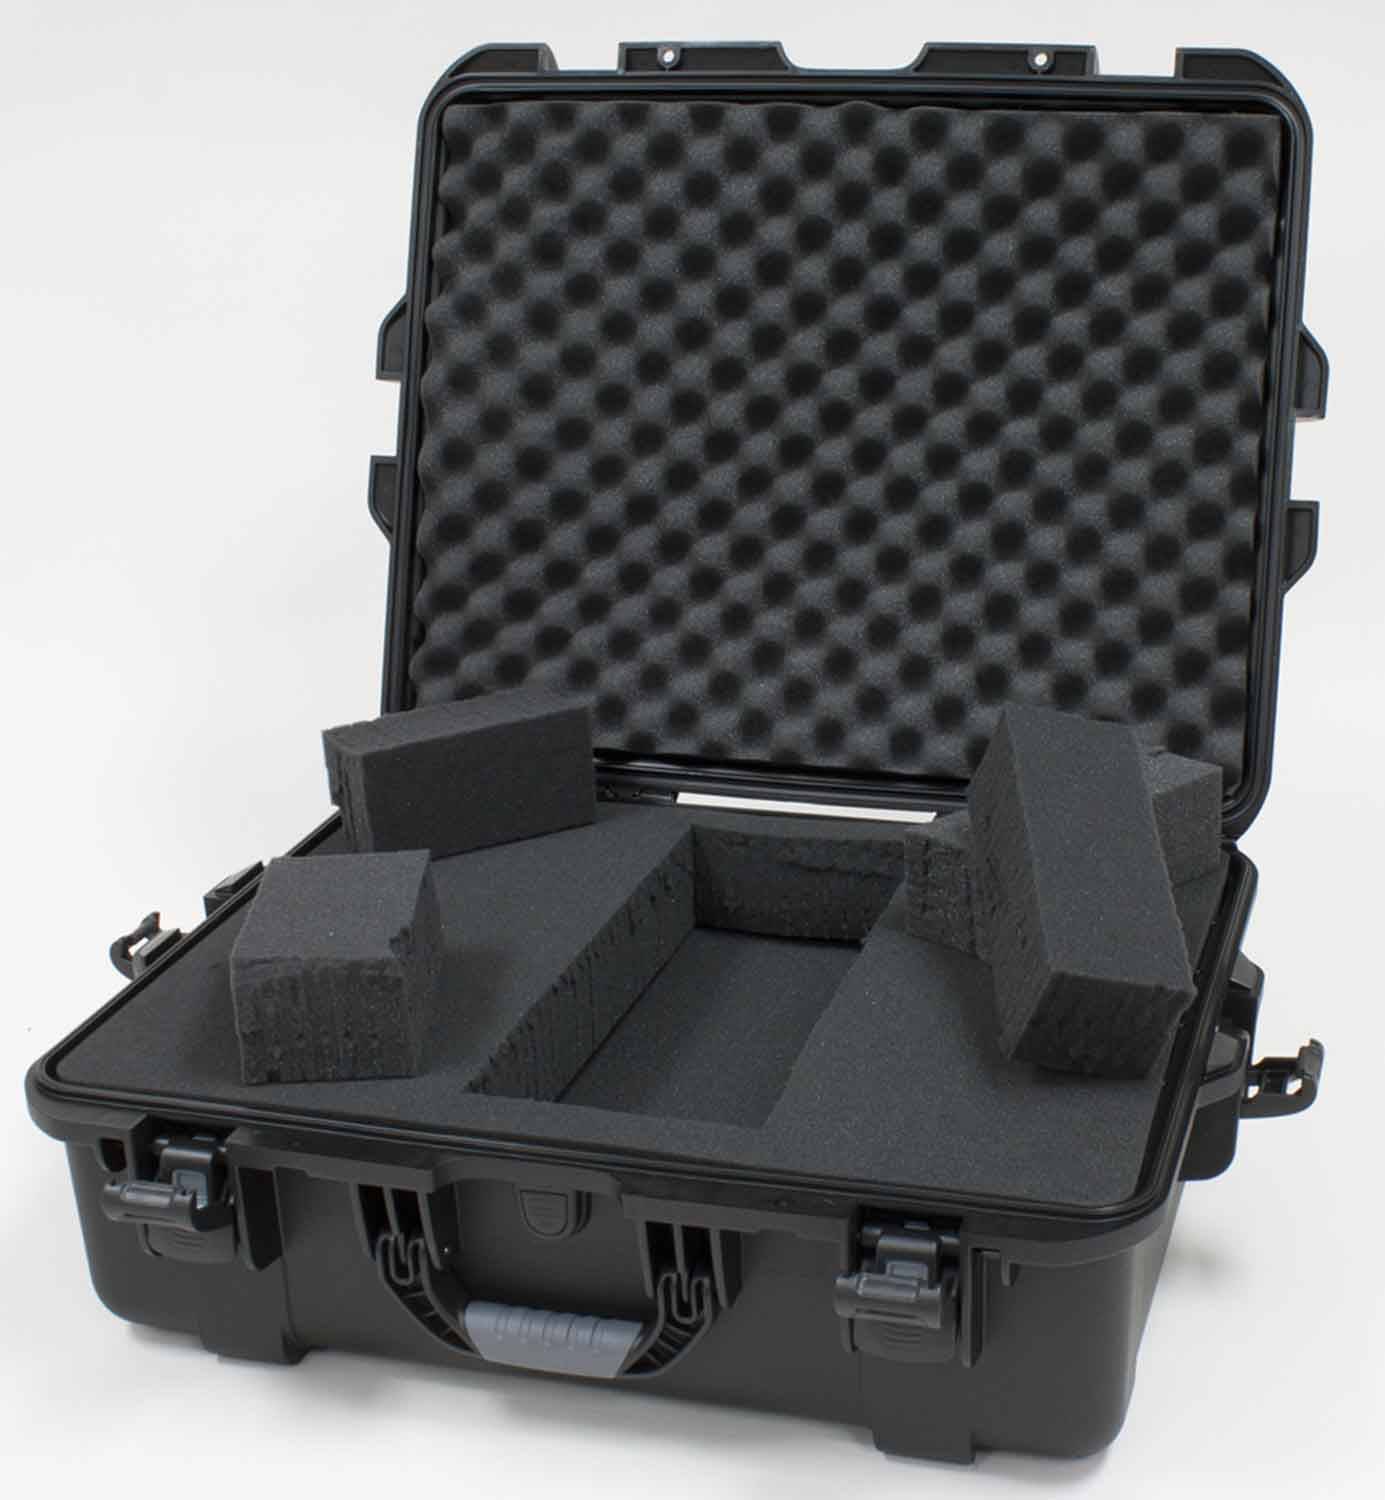 Gator Cases GU-2217-08-WPDF Waterproof Injection Molded Case with Diced Foam - 22" x 17" x 8.2" - Hollywood DJ